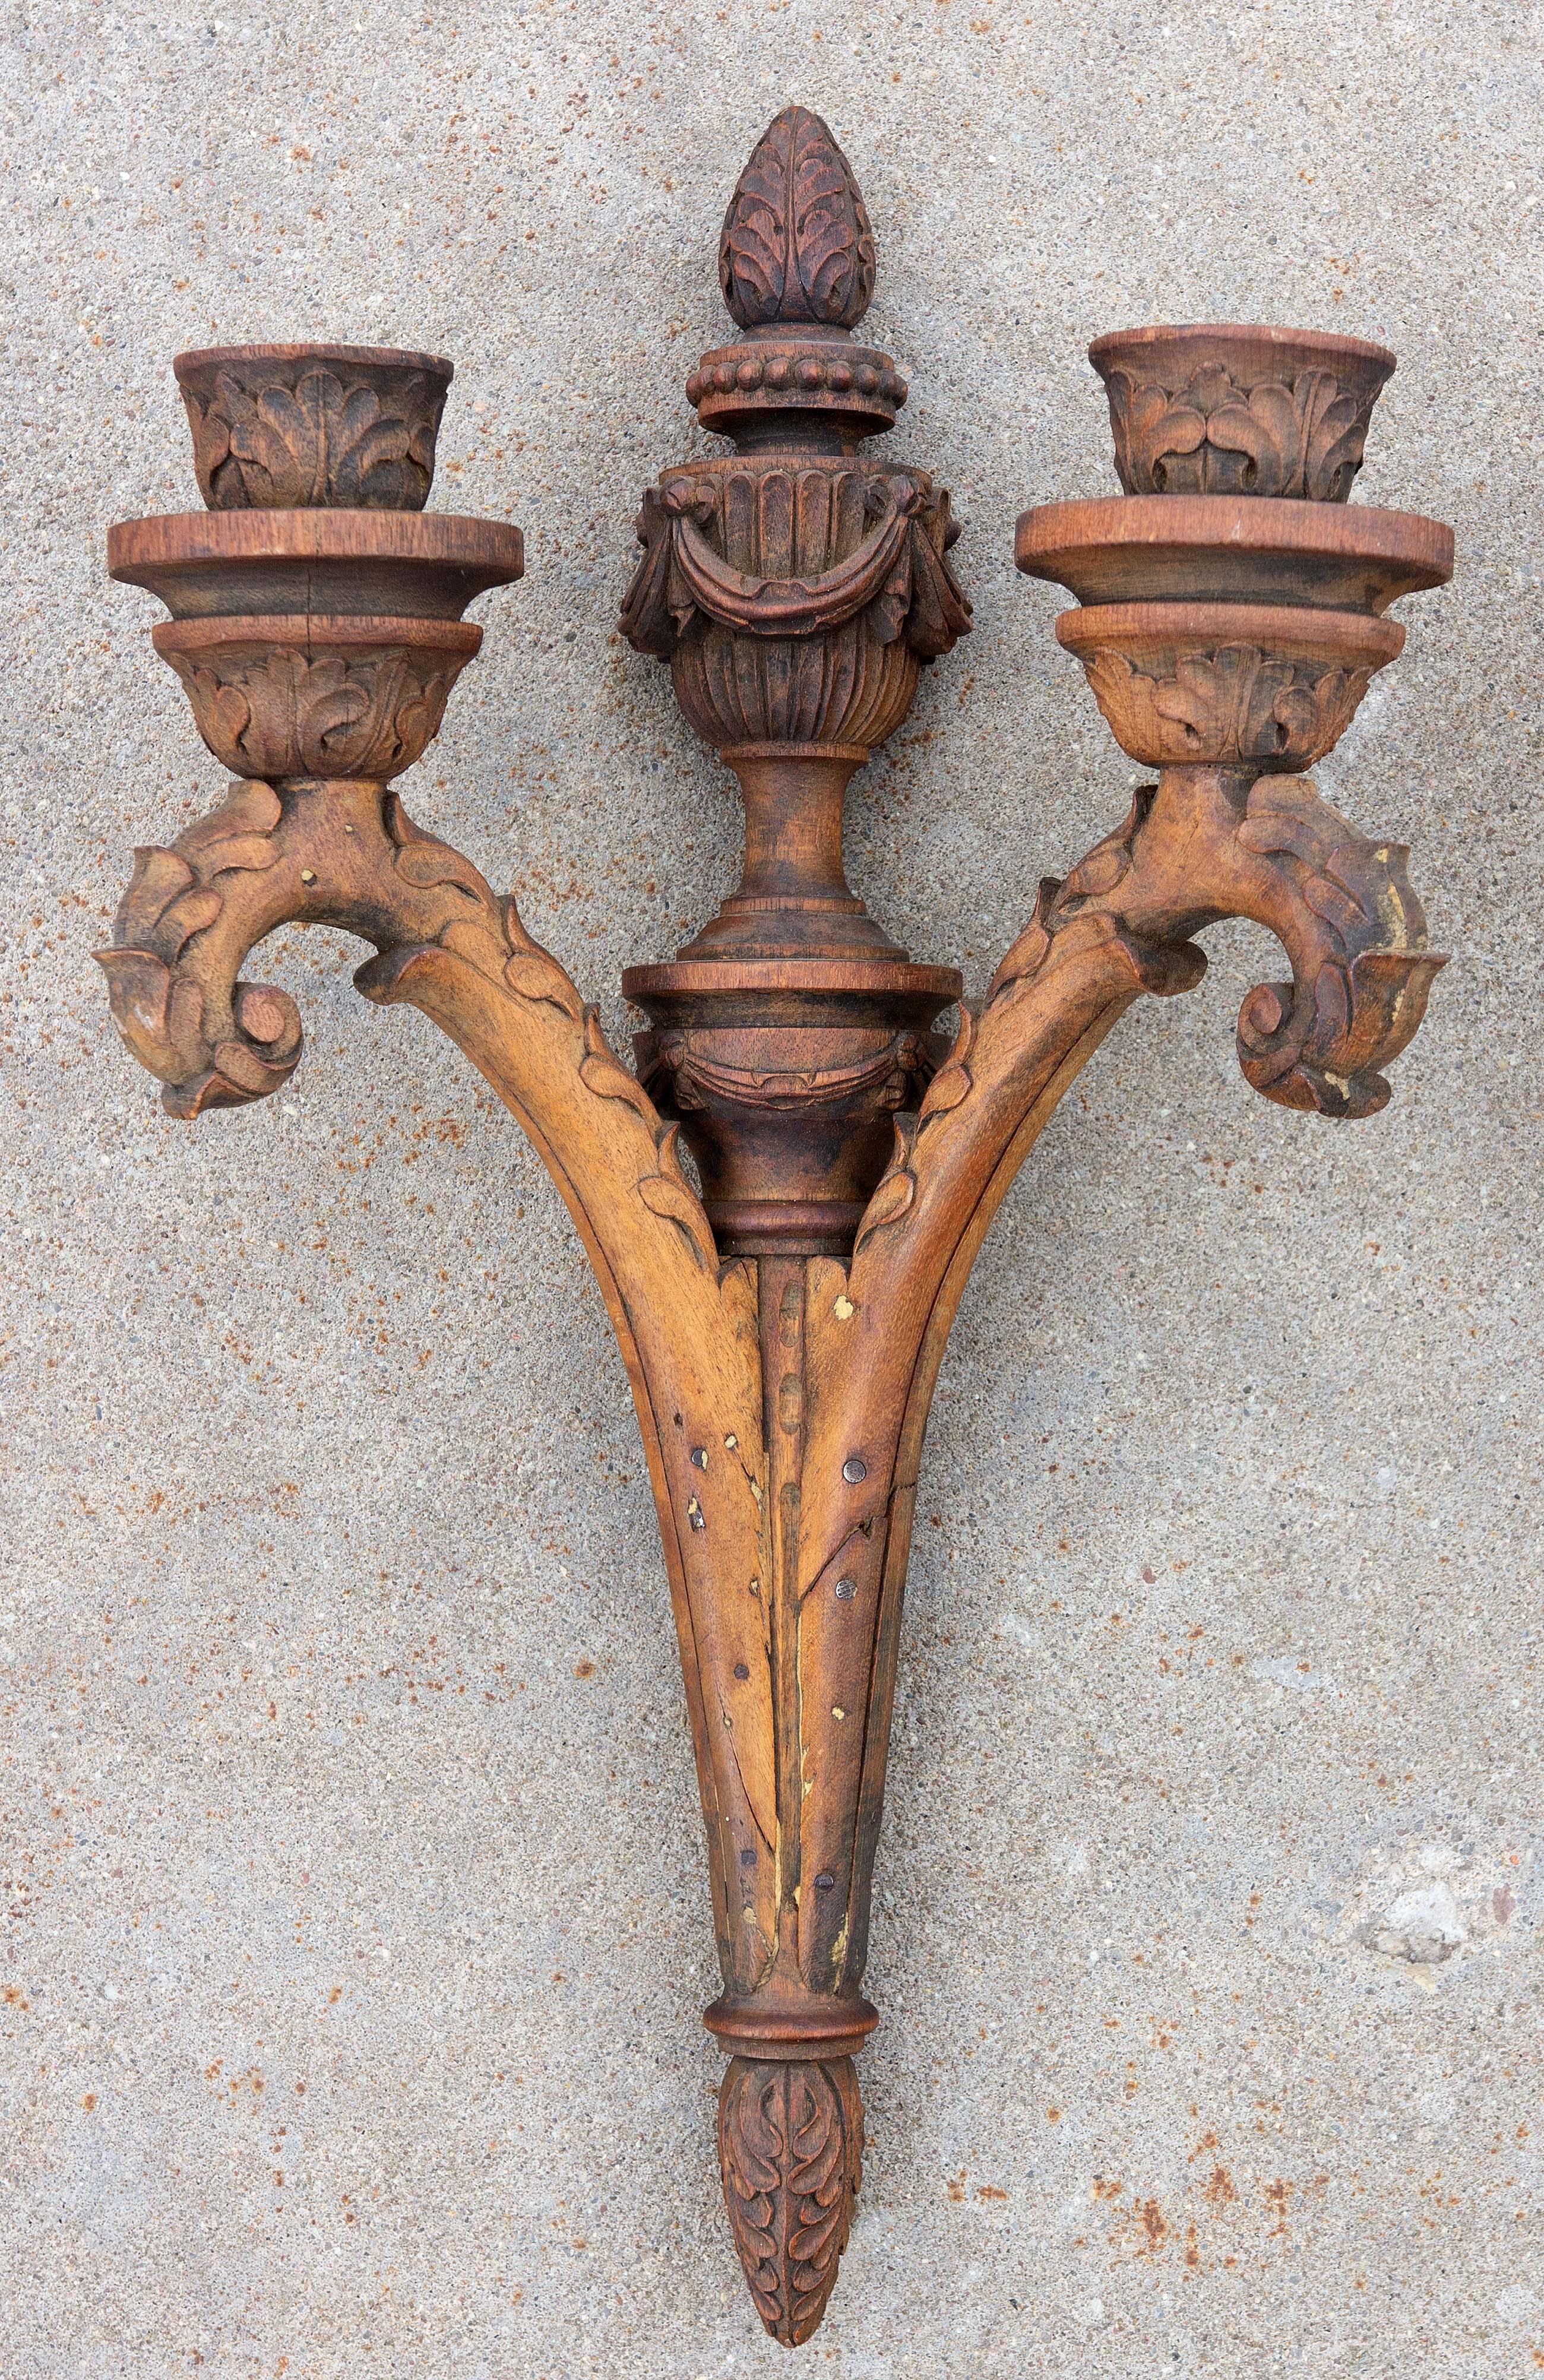 Pair of neoclassical style wood sconces. They are well carved. Mahogany. Late 19th century. They would look great painted.